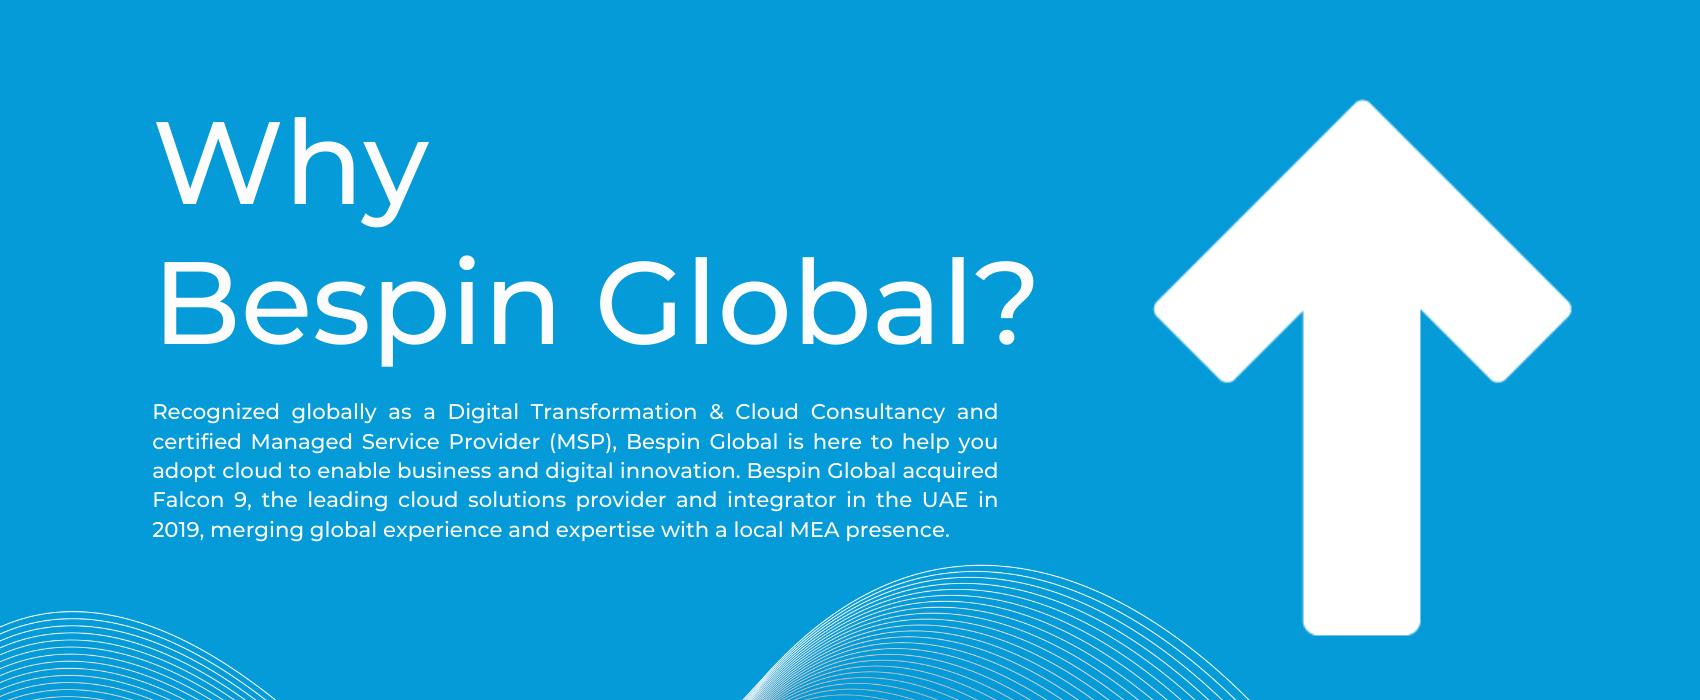 Why Bespin Global (1700 × 700 px)(2)